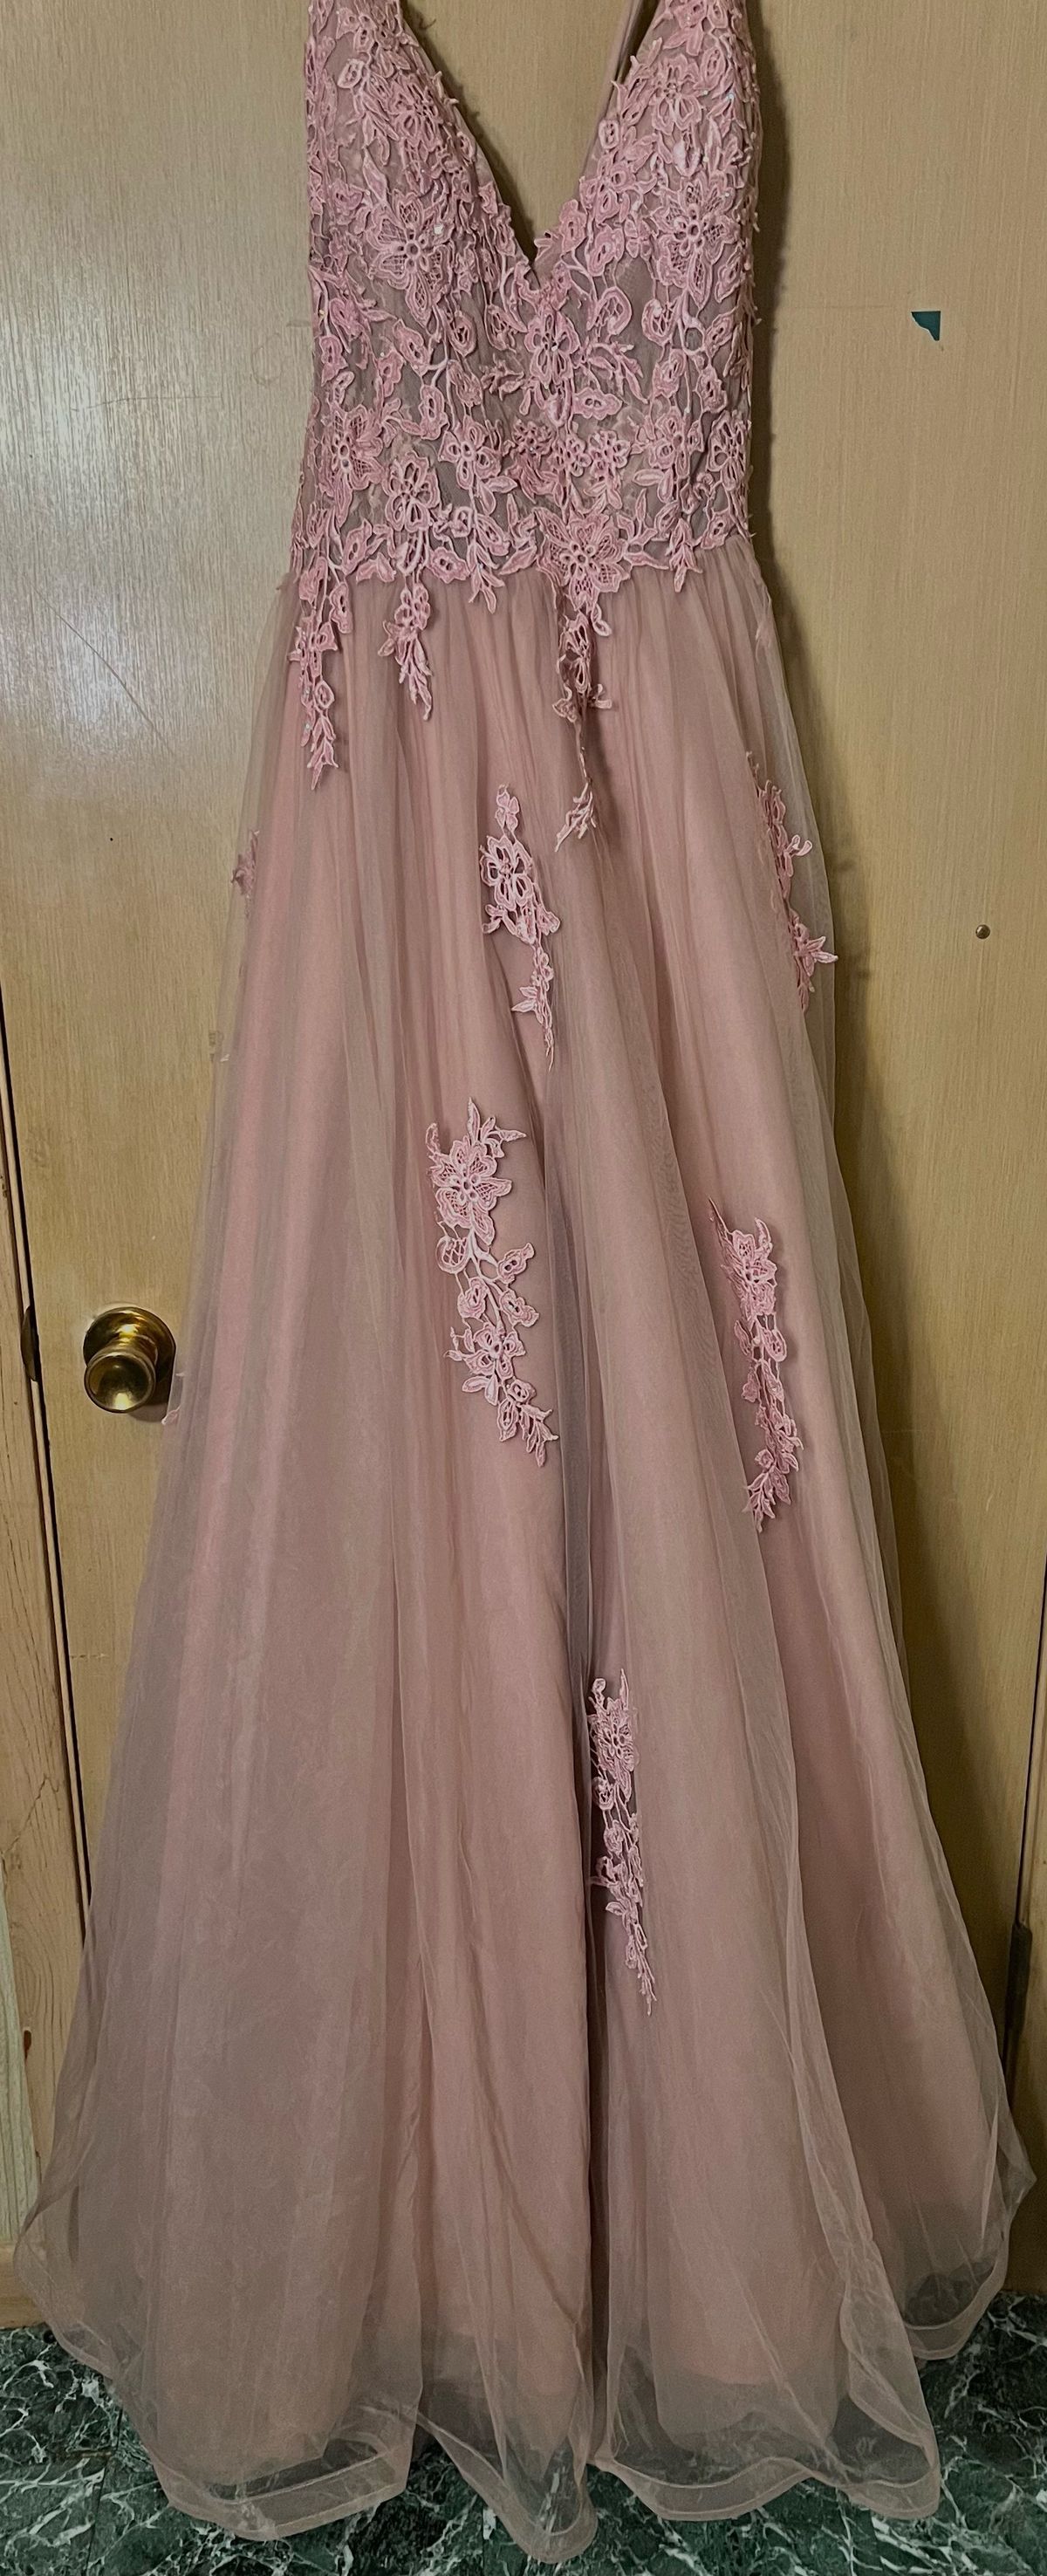 RENÉ The Label Size 2X Prom Lace Light Pink A-line Dress on Queenly